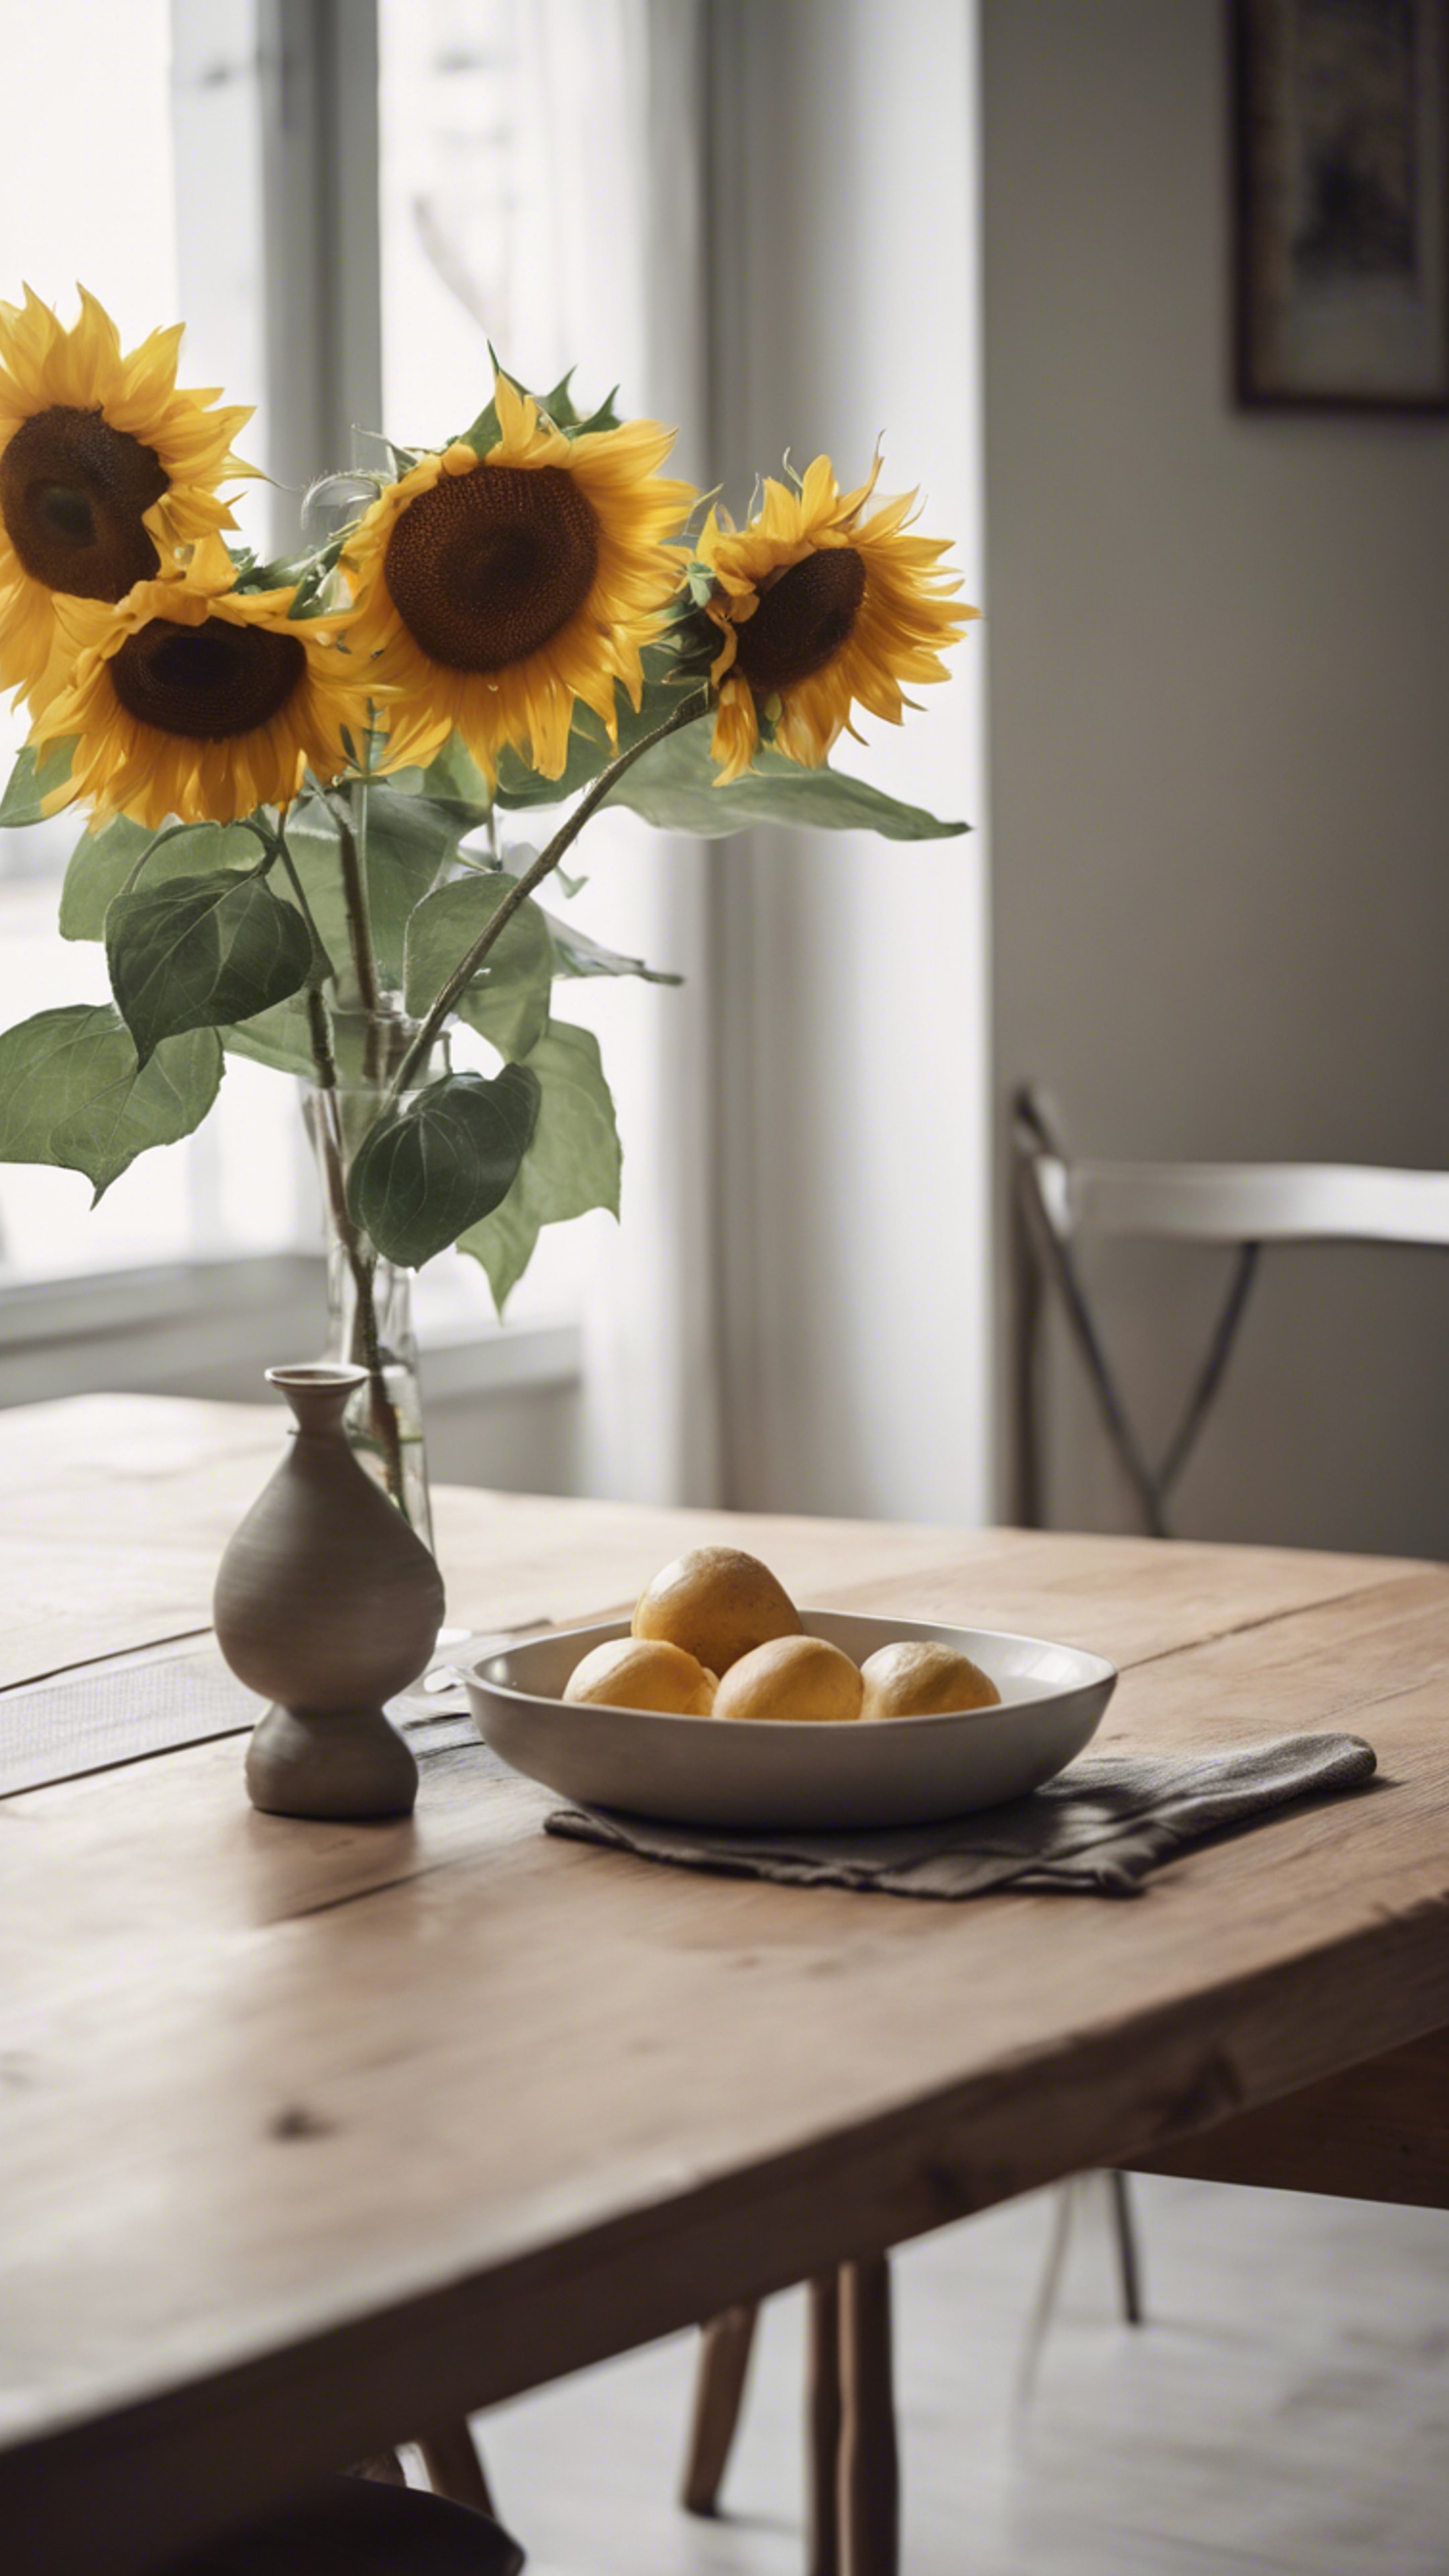 A minimalist dining area with a wooden table, set with simple china and a vase of sunflowers. Tapet[7db5290c1b5a4d25ba08]